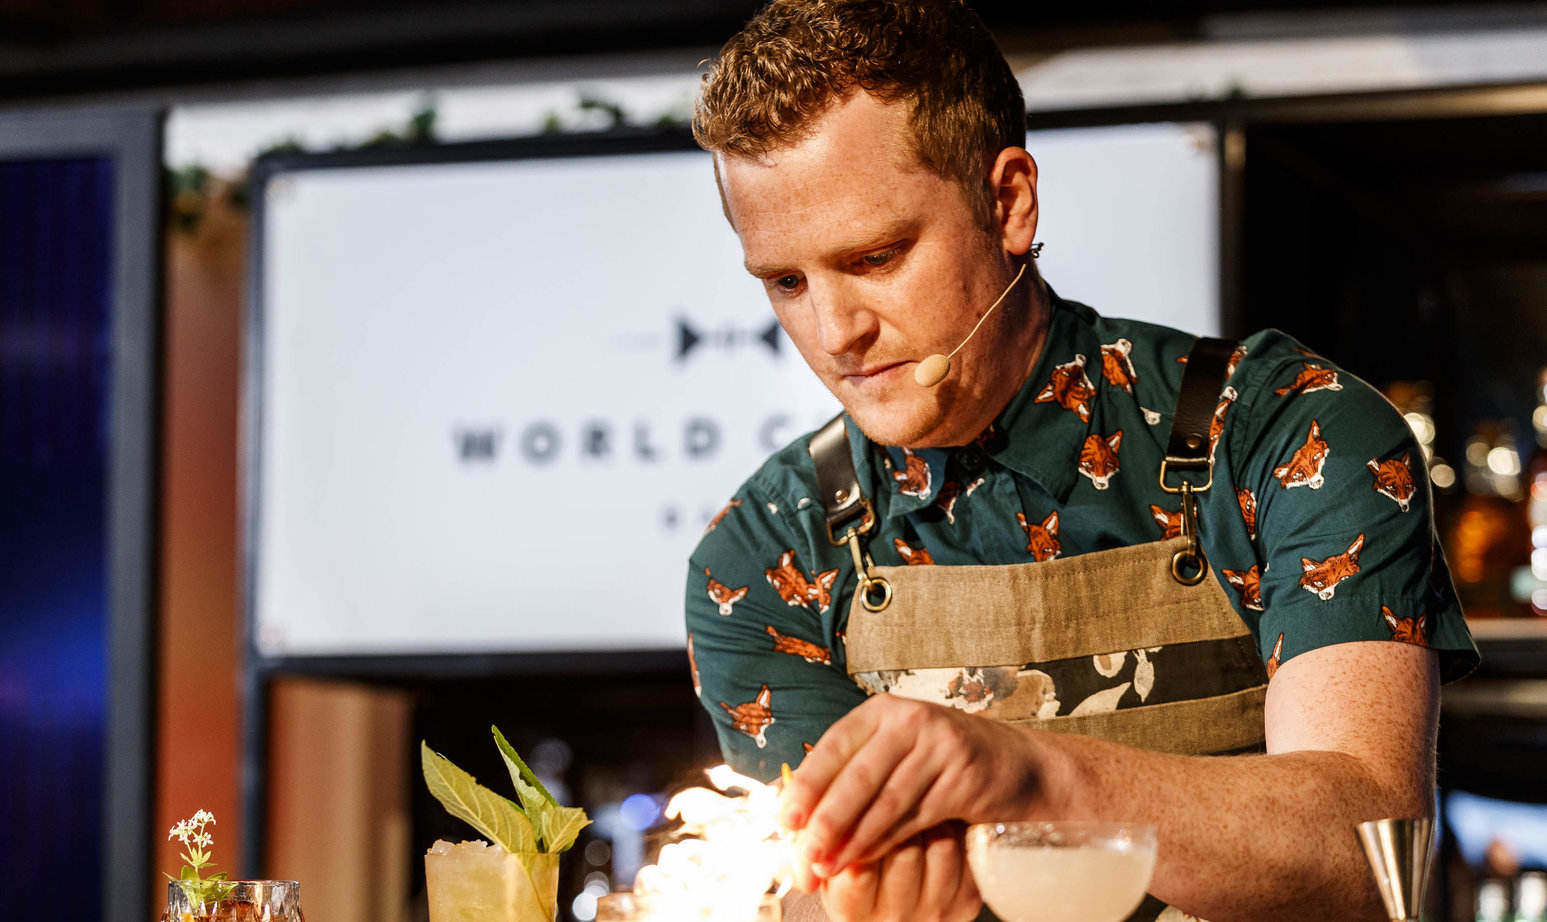 World Class Irish Bartender of the Year Carl D’Alton – “I just want to bring the spirit of Irish hospitality and Irish ingredients to the global stage”.